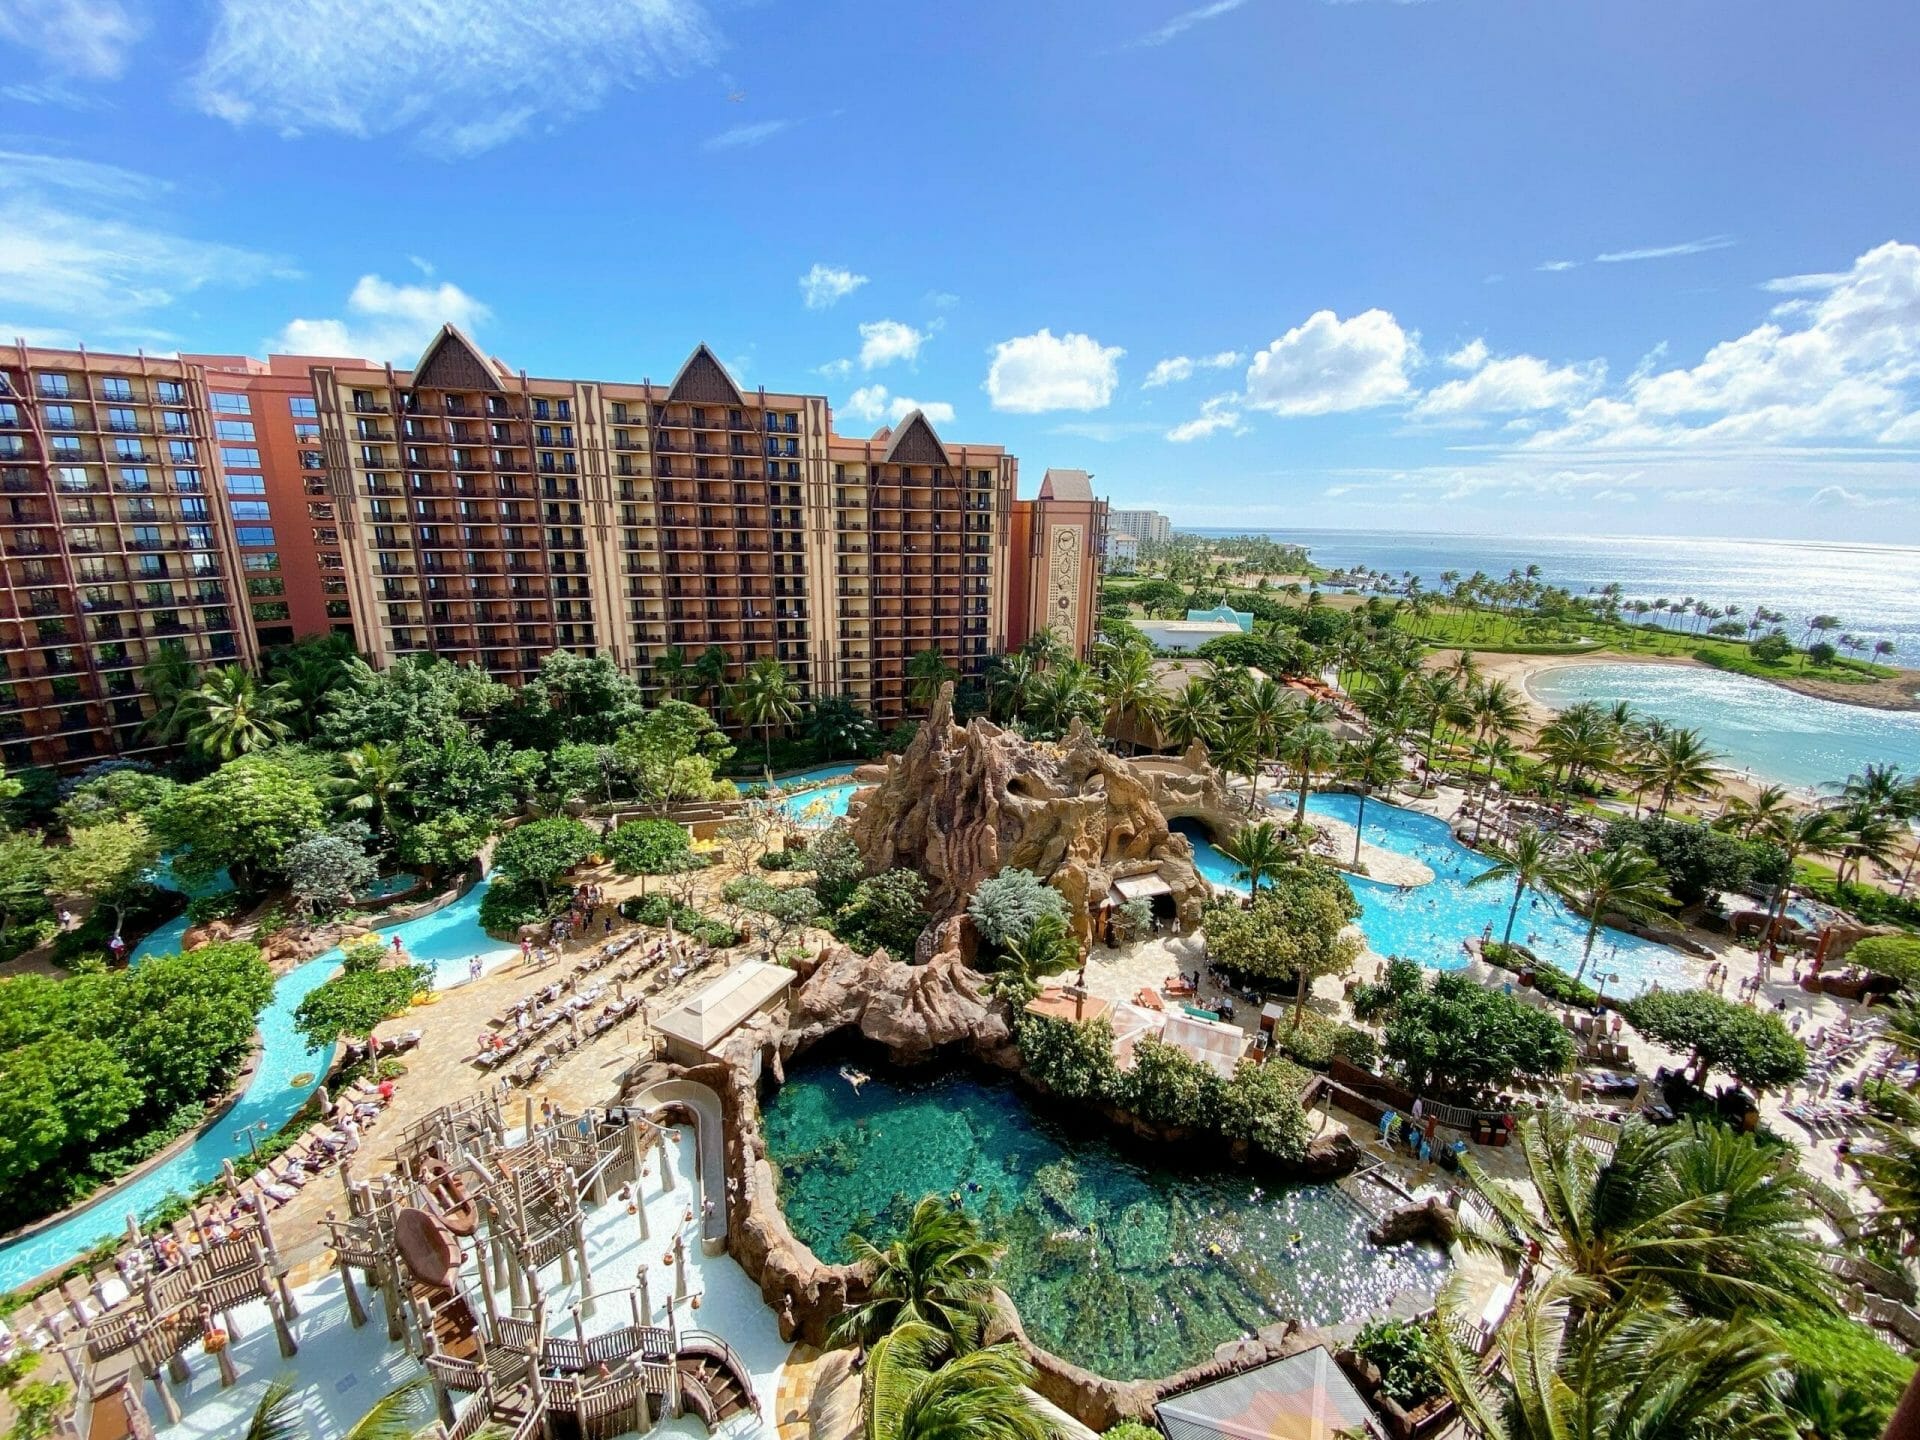 New Offer: Fall Escape at Aulani, A Disney Resort & Spa